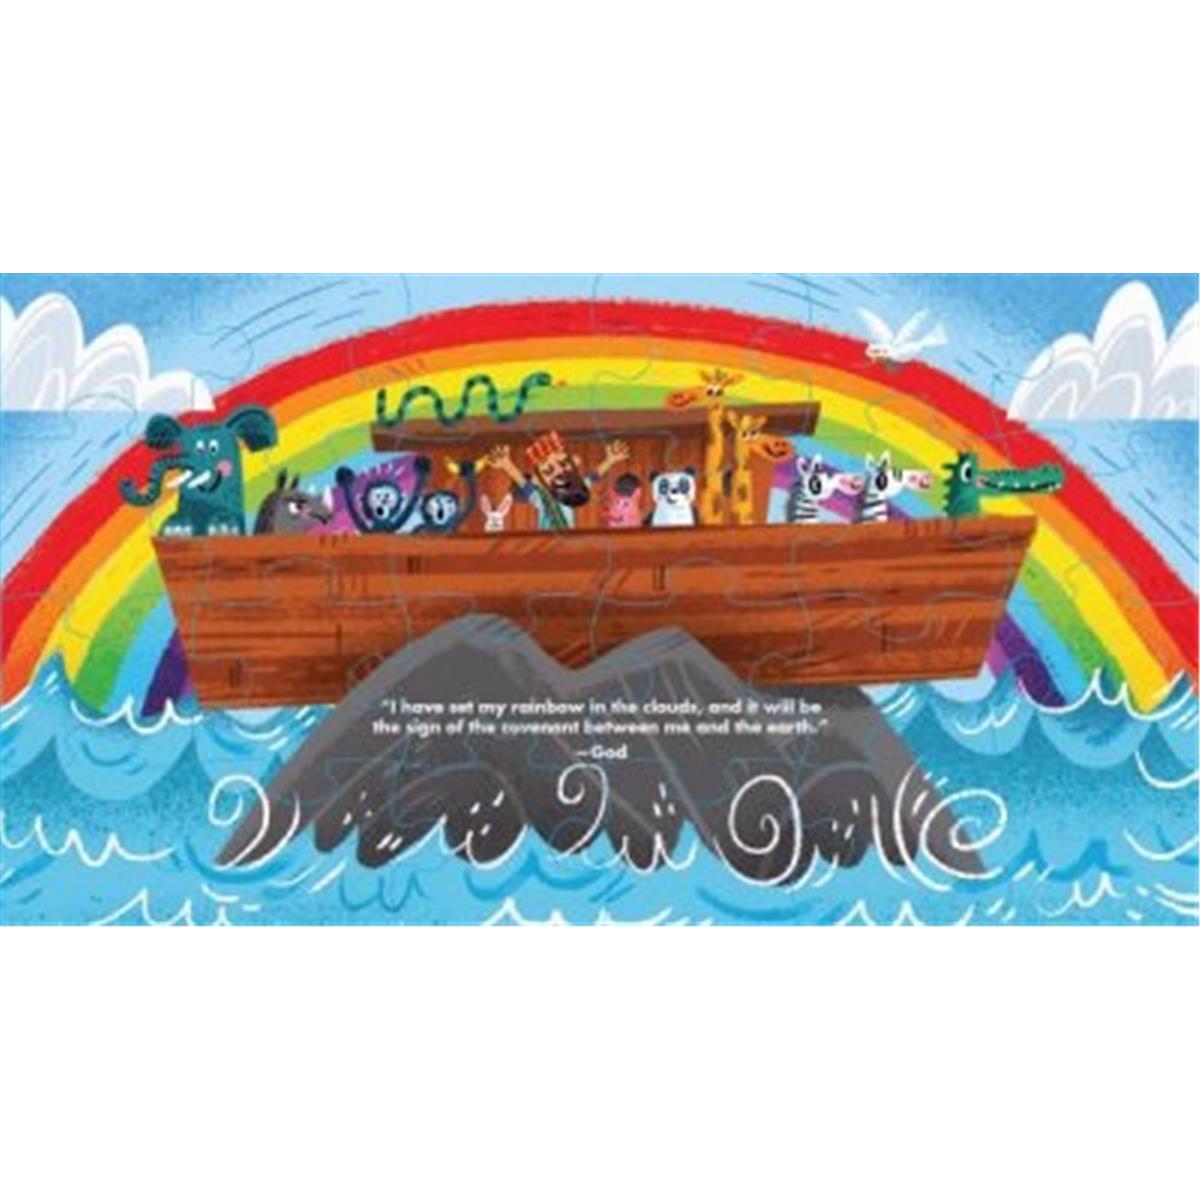 143723 Our Daily Bread For Kids Noahs Ark 24 Piece Jigsaw Puzzle